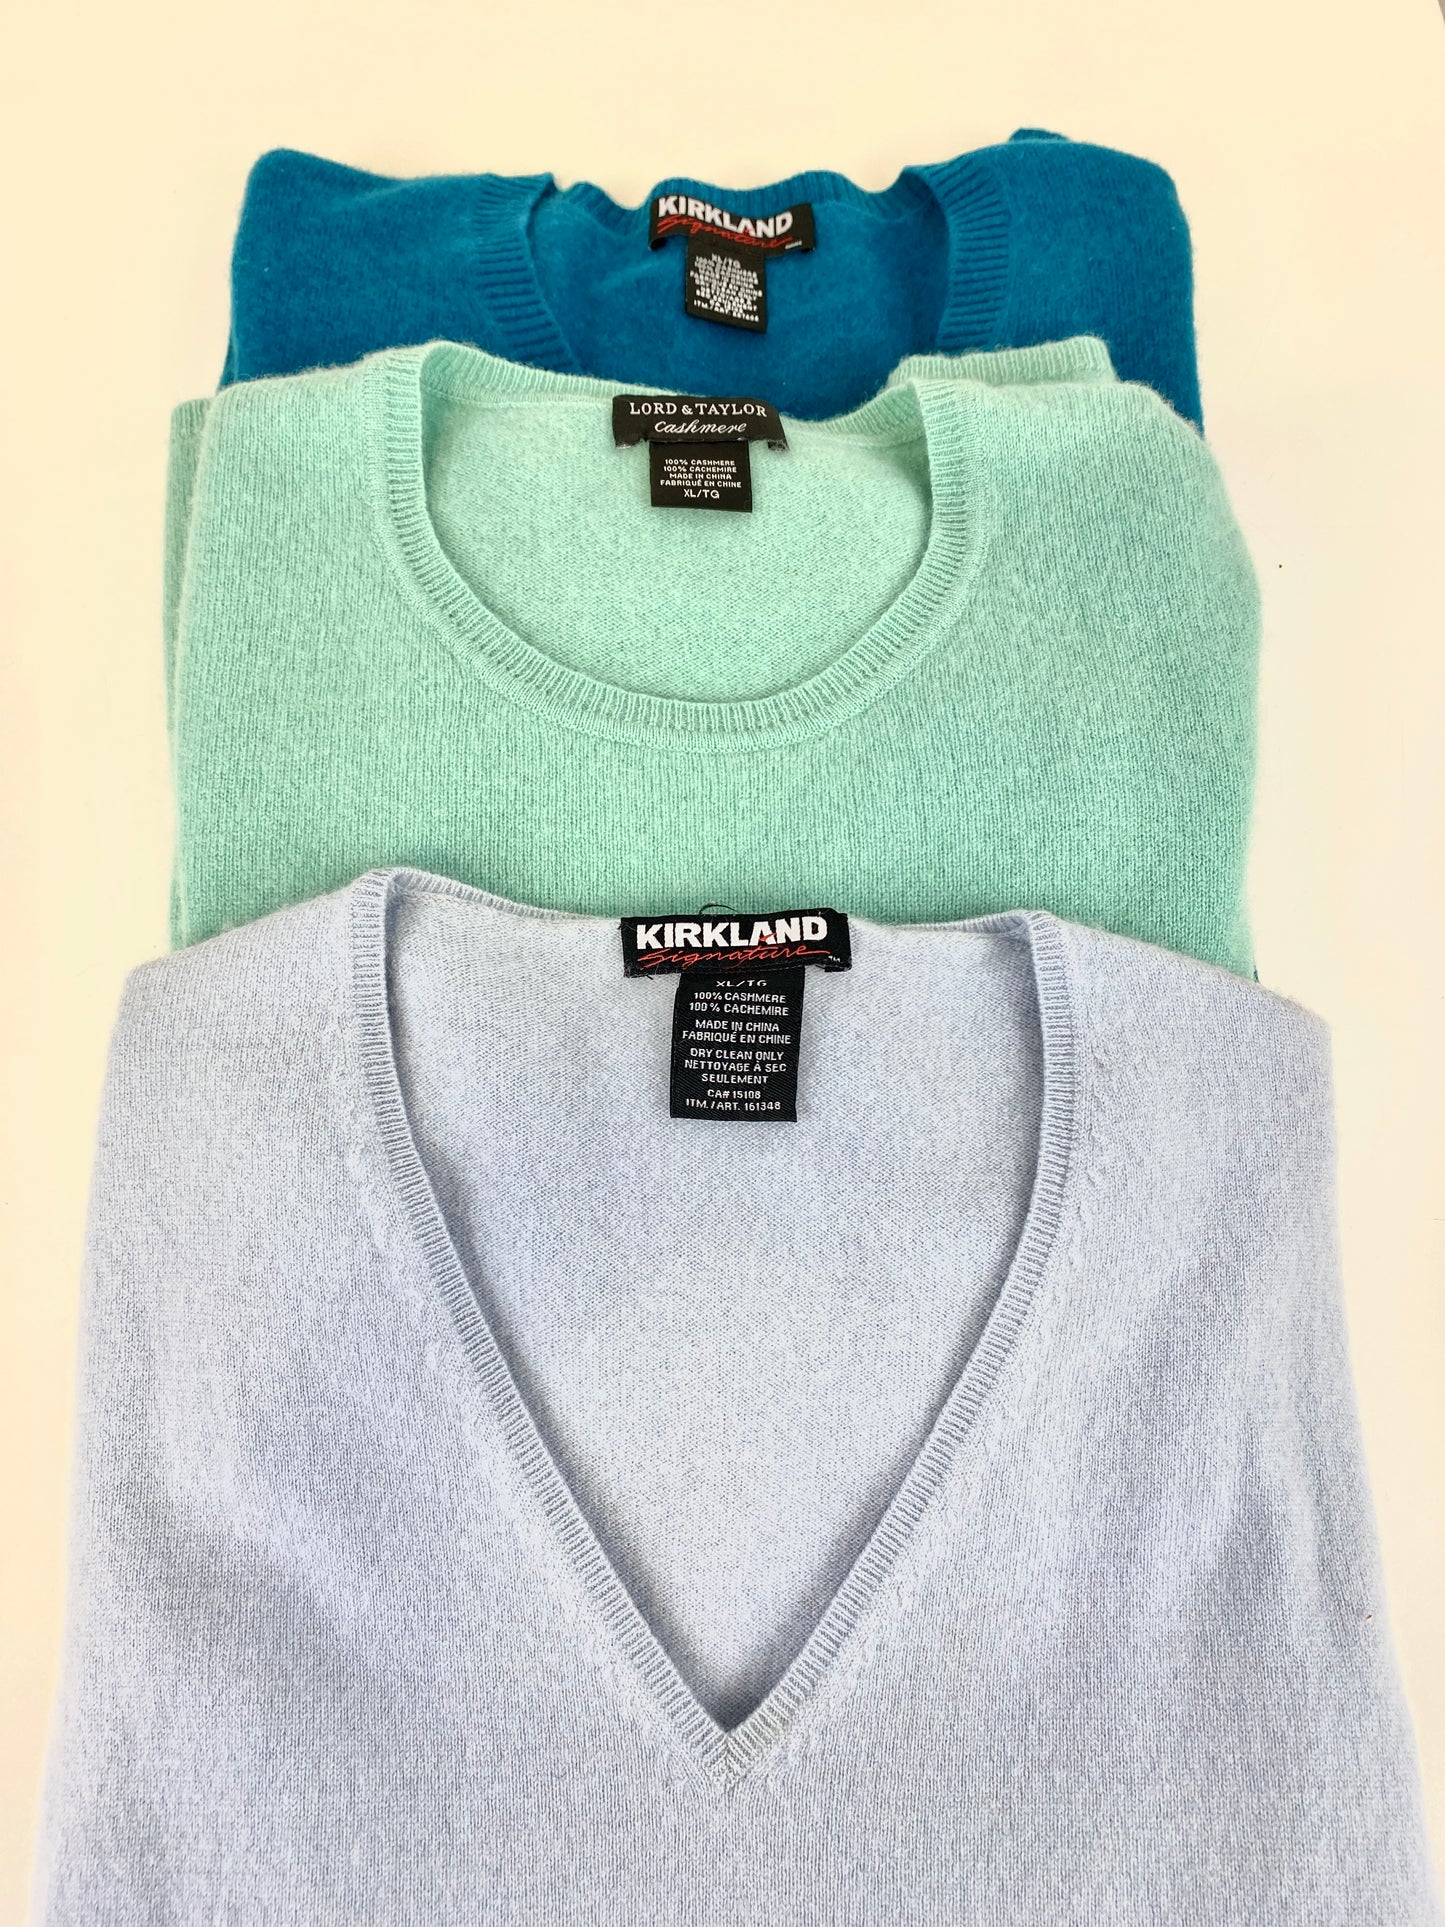 2 V neck and 1 crew neck cashmere sweaters in blue and green. Ian Drummond Vintage. 